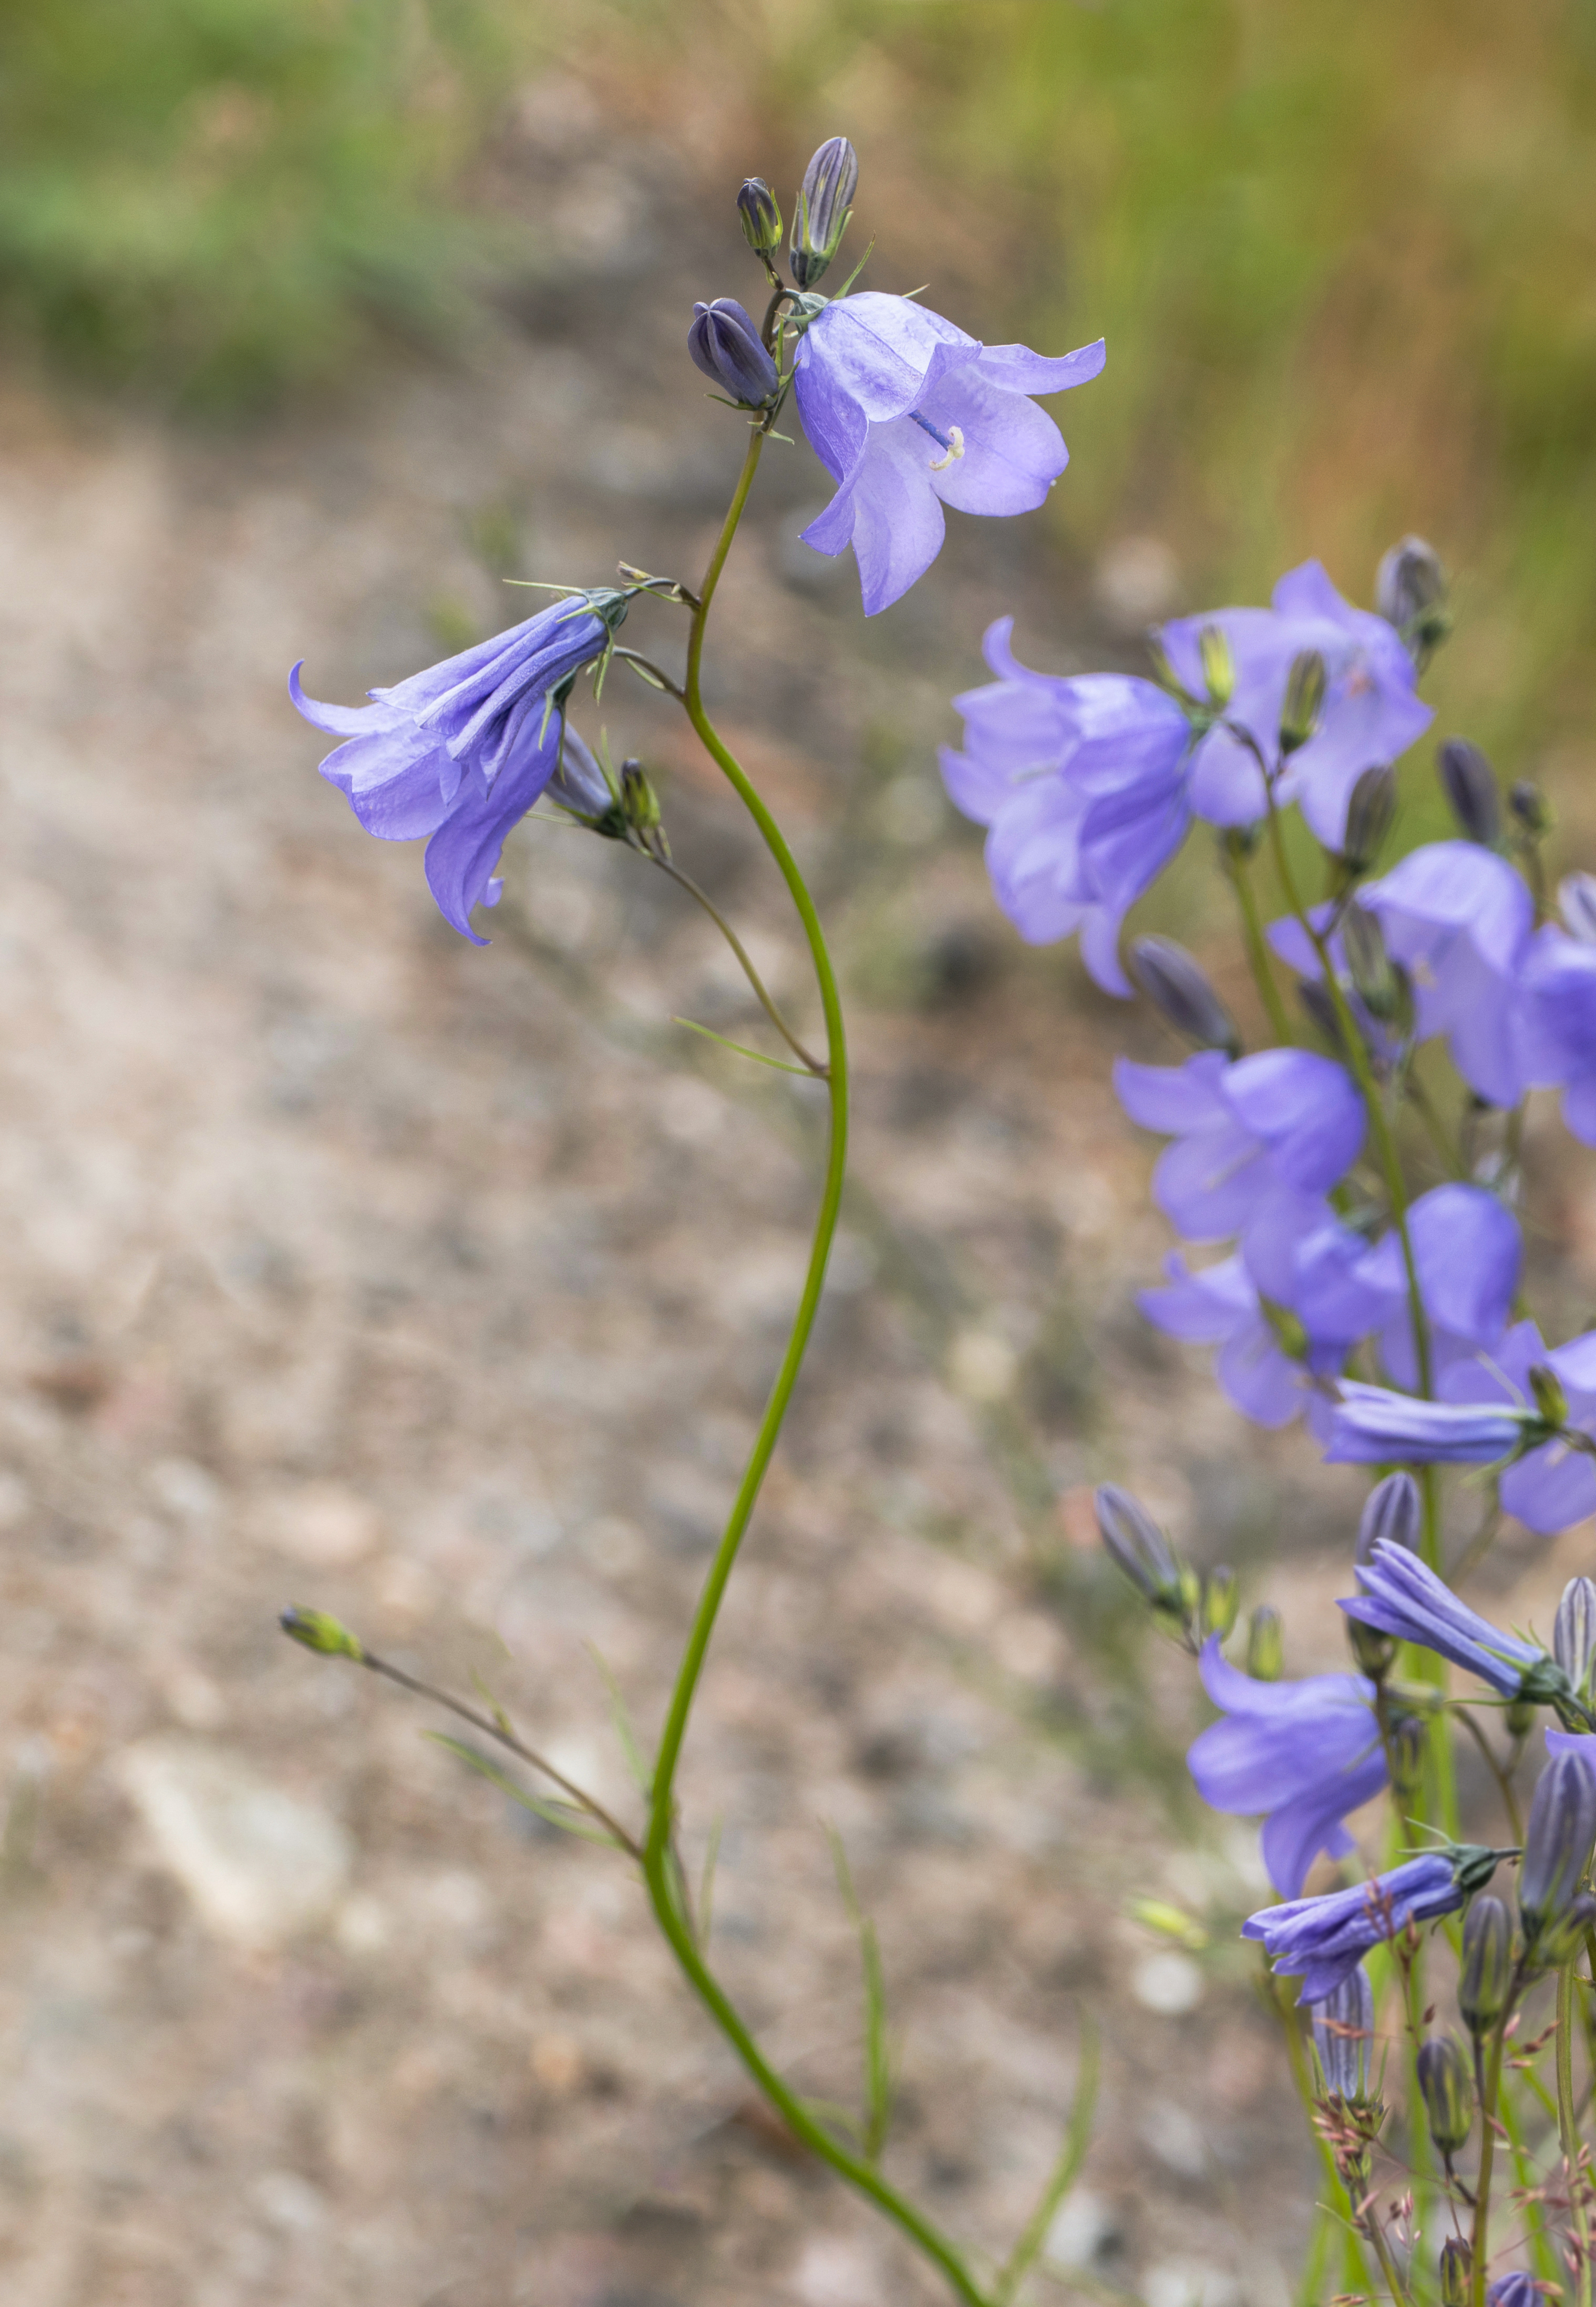 Harebells by a road